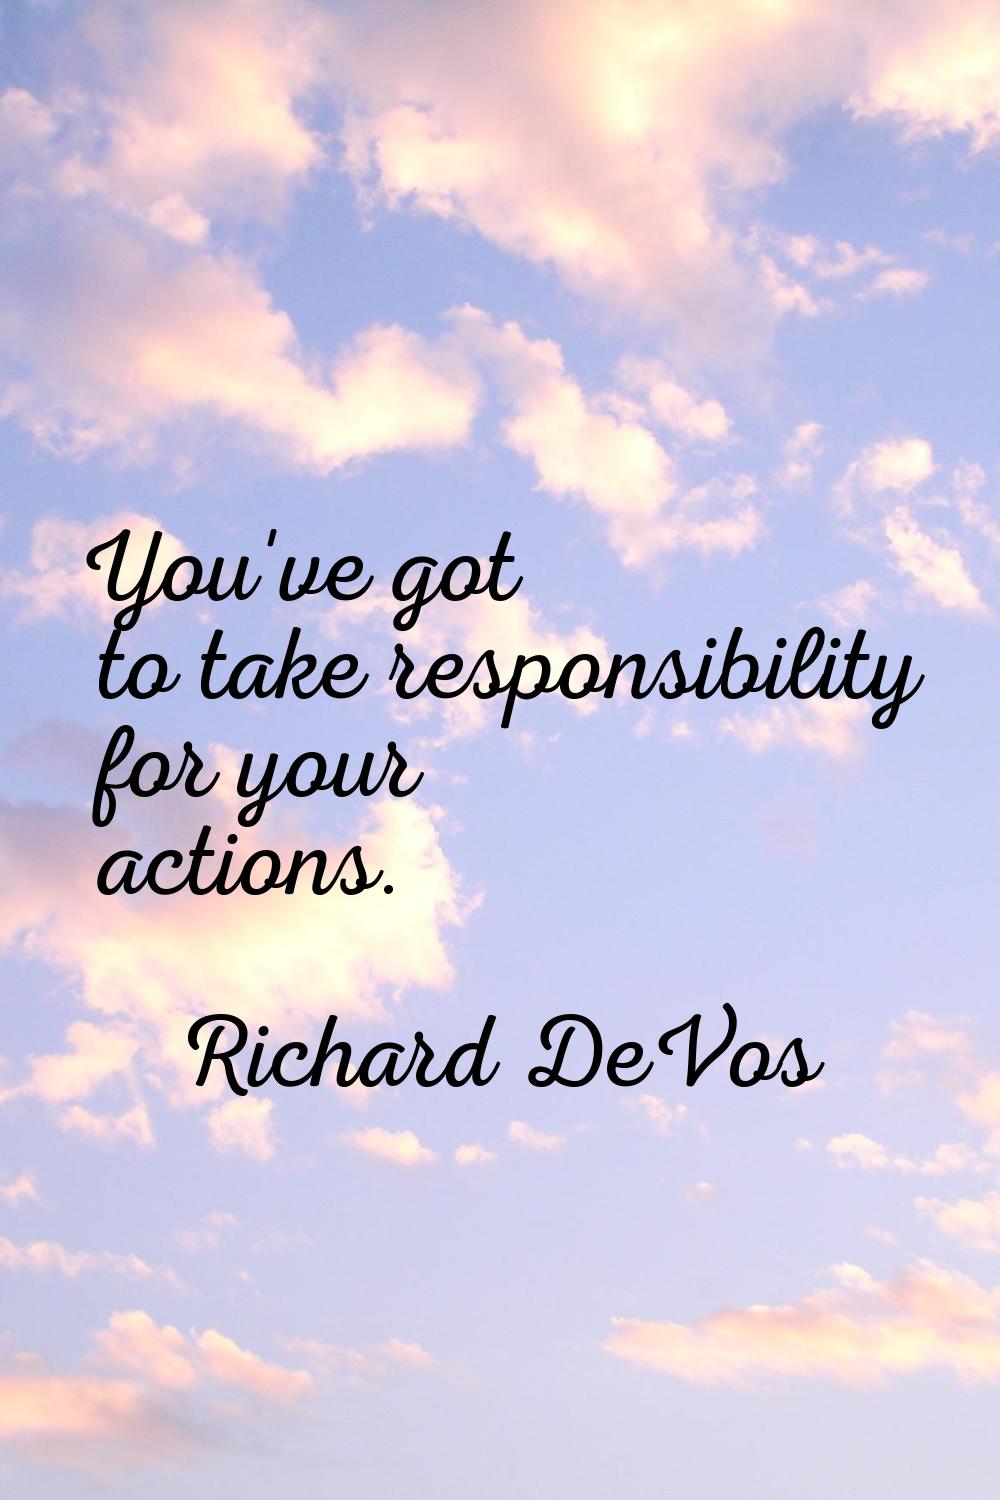 You've got to take responsibility for your actions.